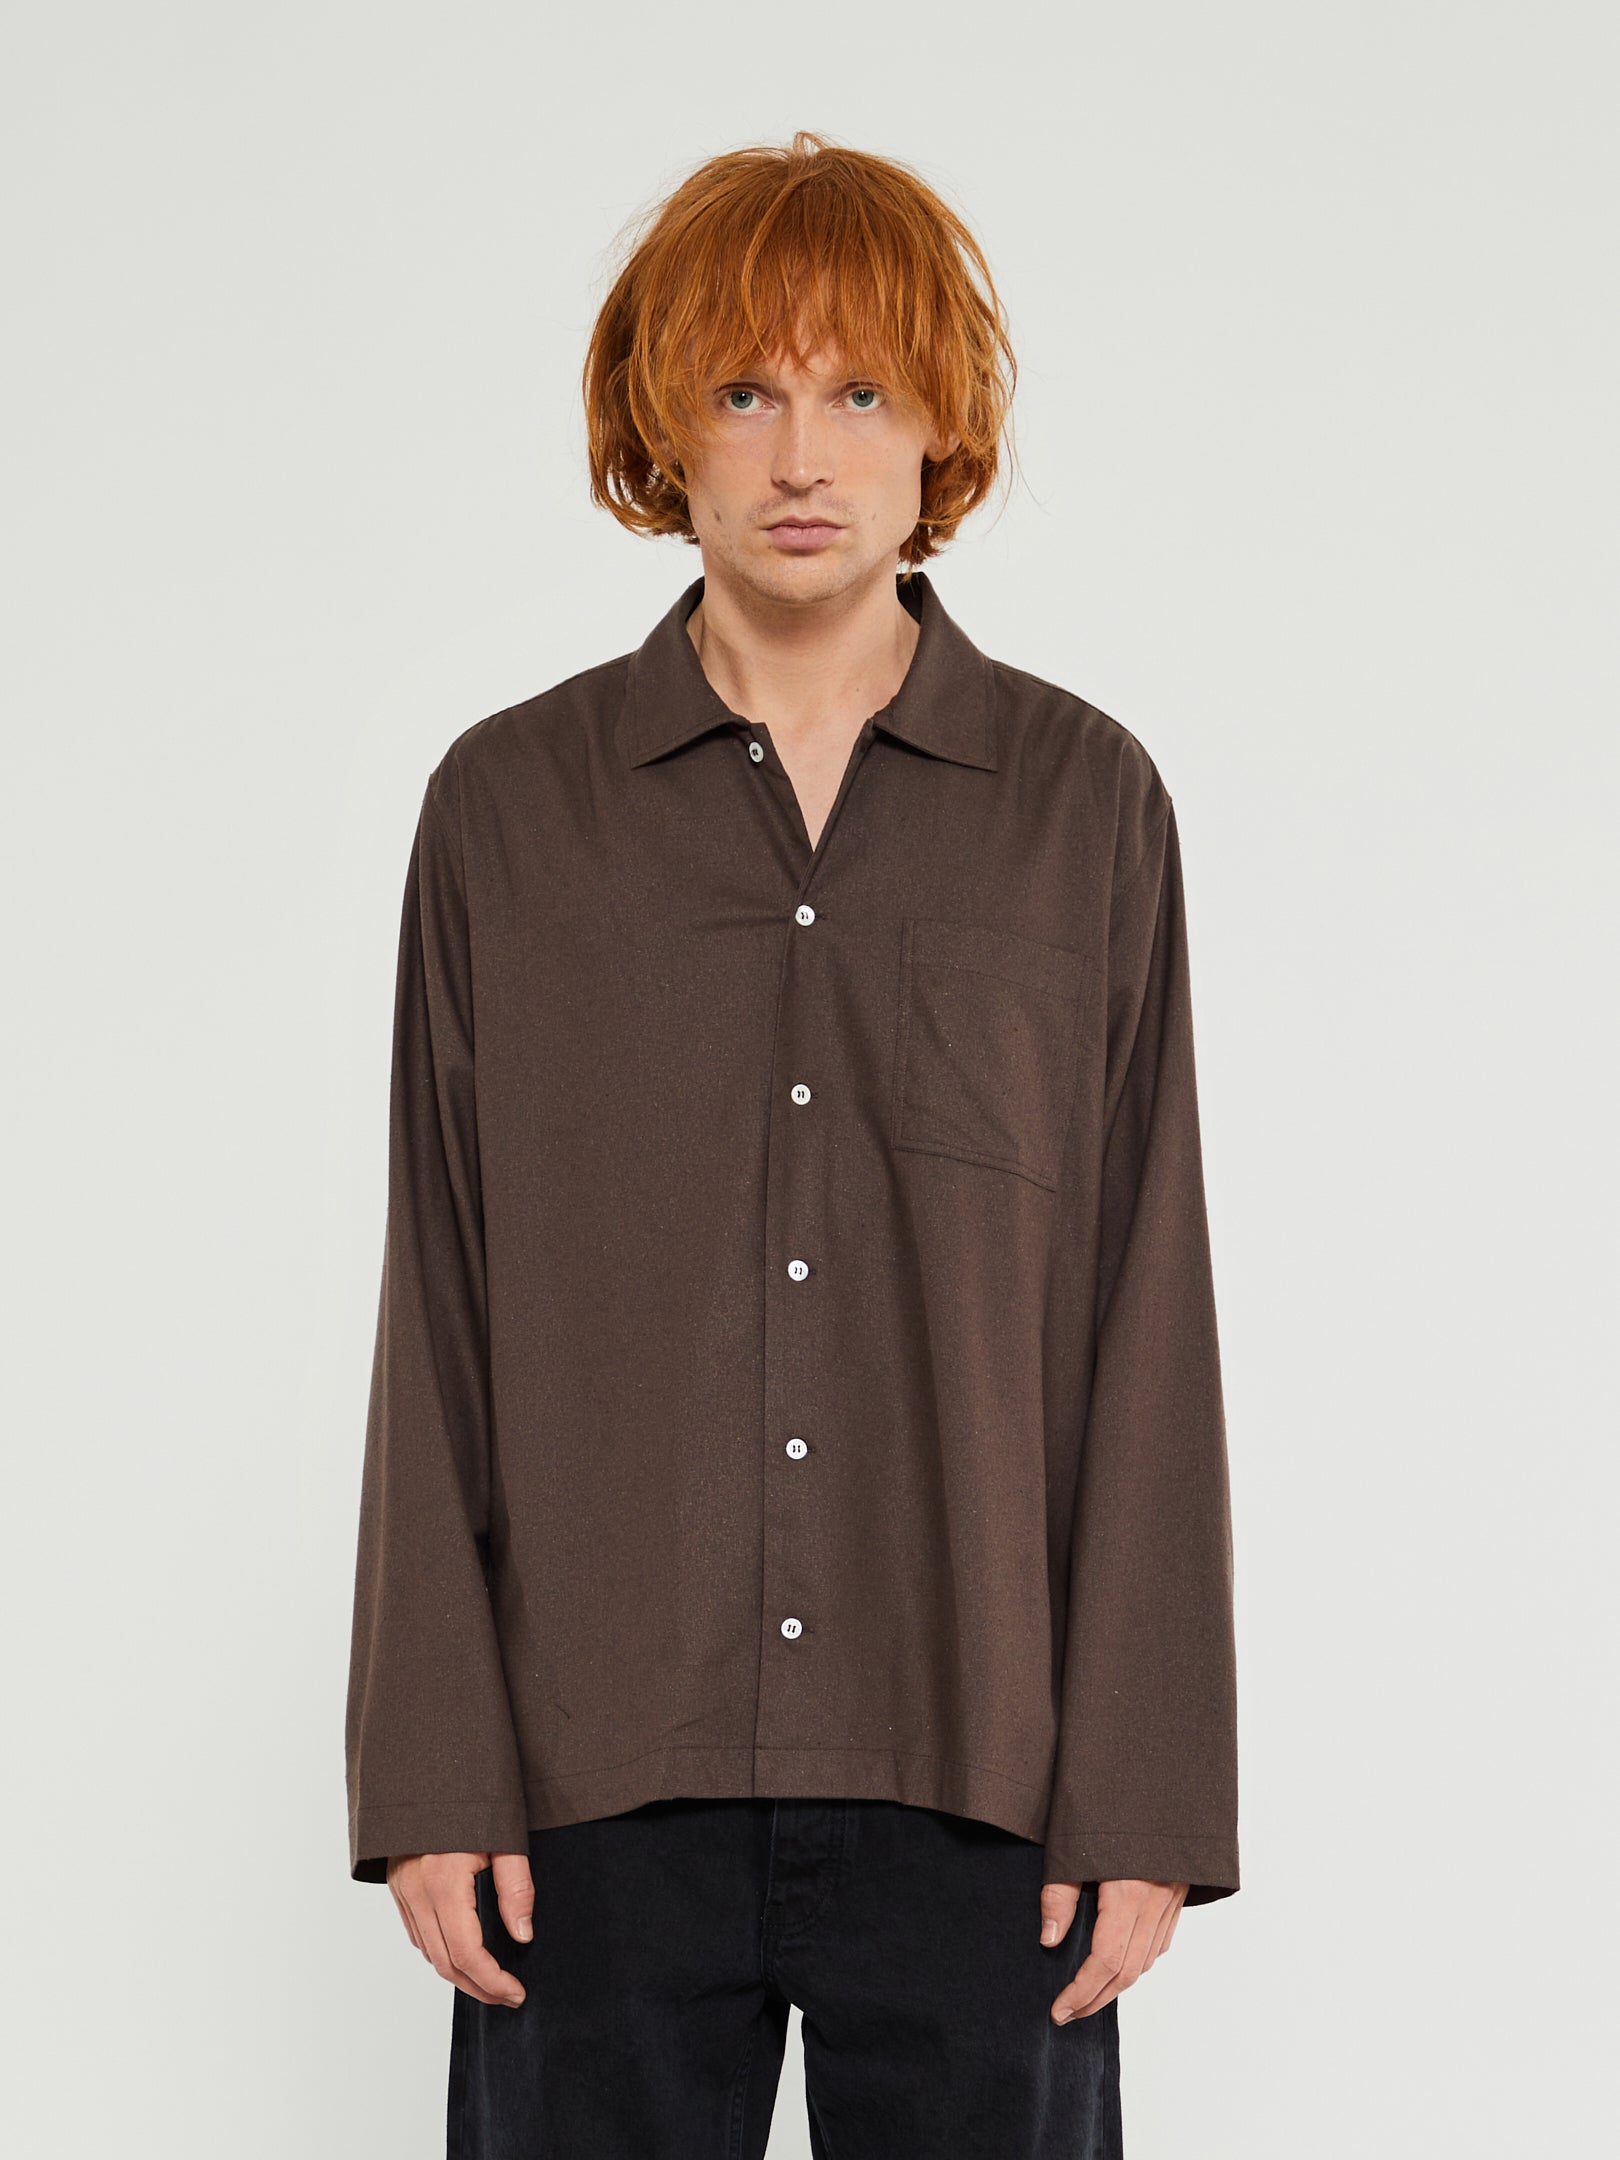 ANOTHER ASPECT - Shirt 2.1 Raw Silk Long Sleeved Shirt in Brown